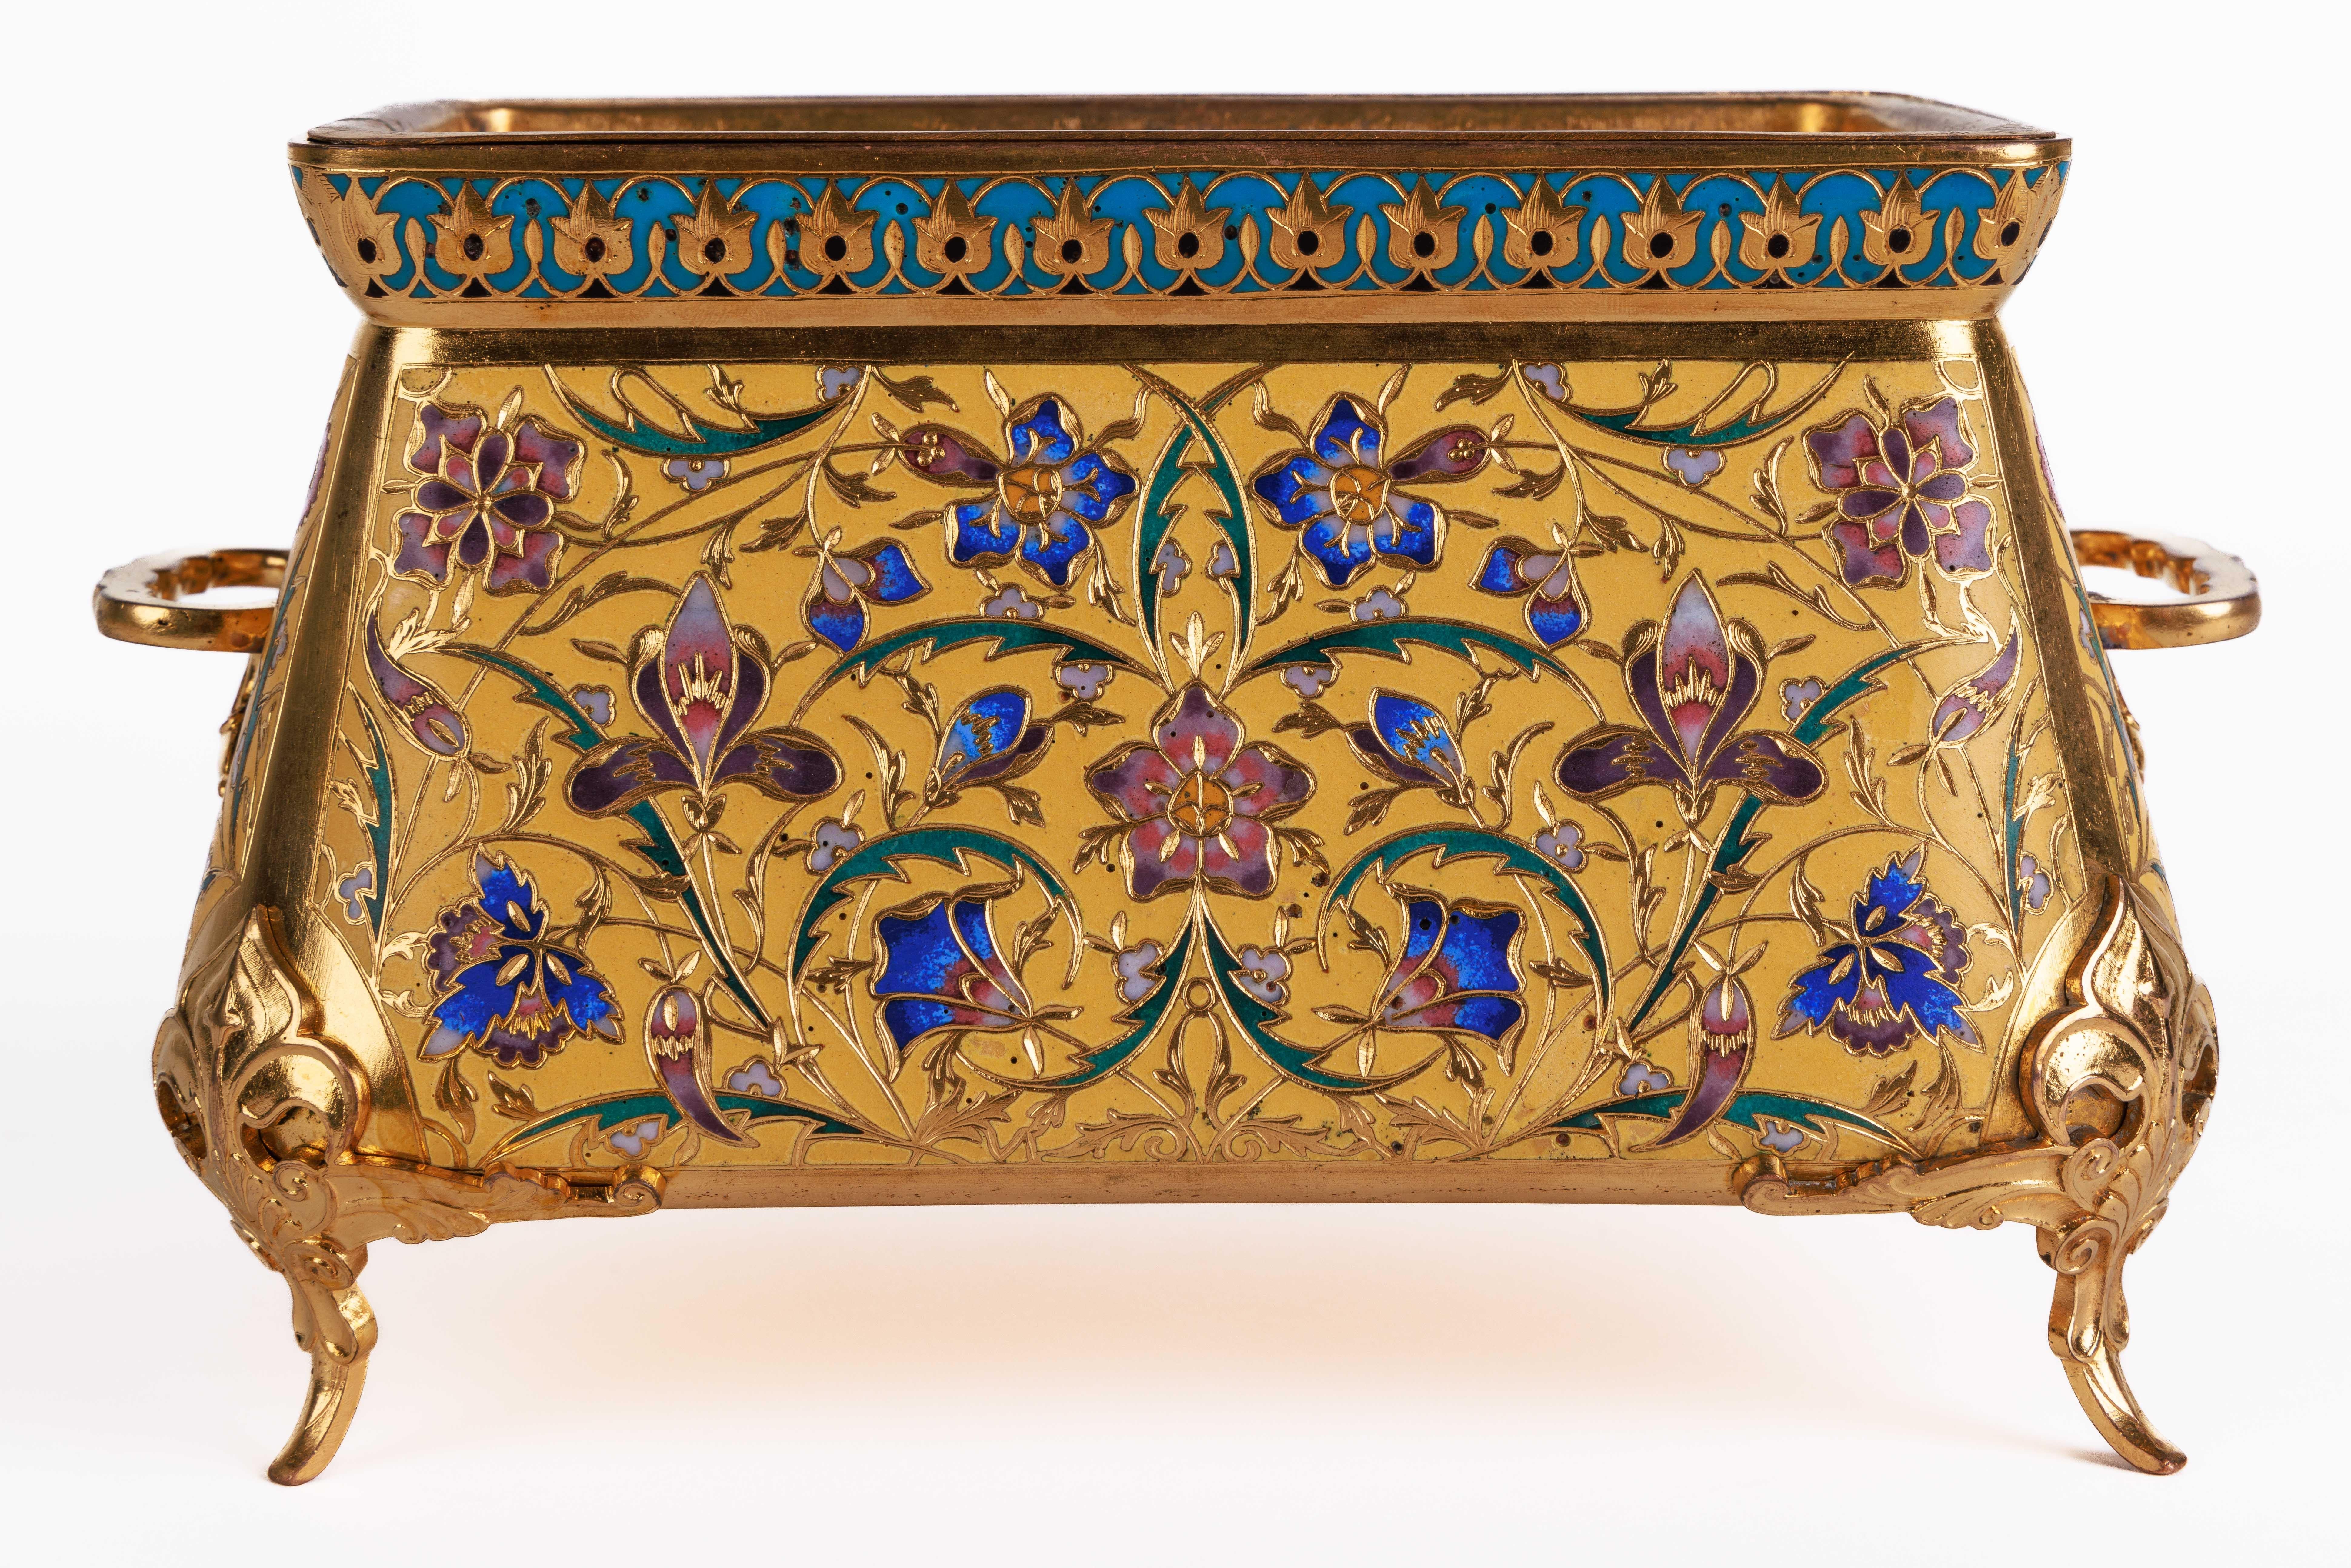 Napoleon III Ferdinand Barbedienne, a French Ormolu and Champleve Enamel Jardiniere, C. 1870 For Sale